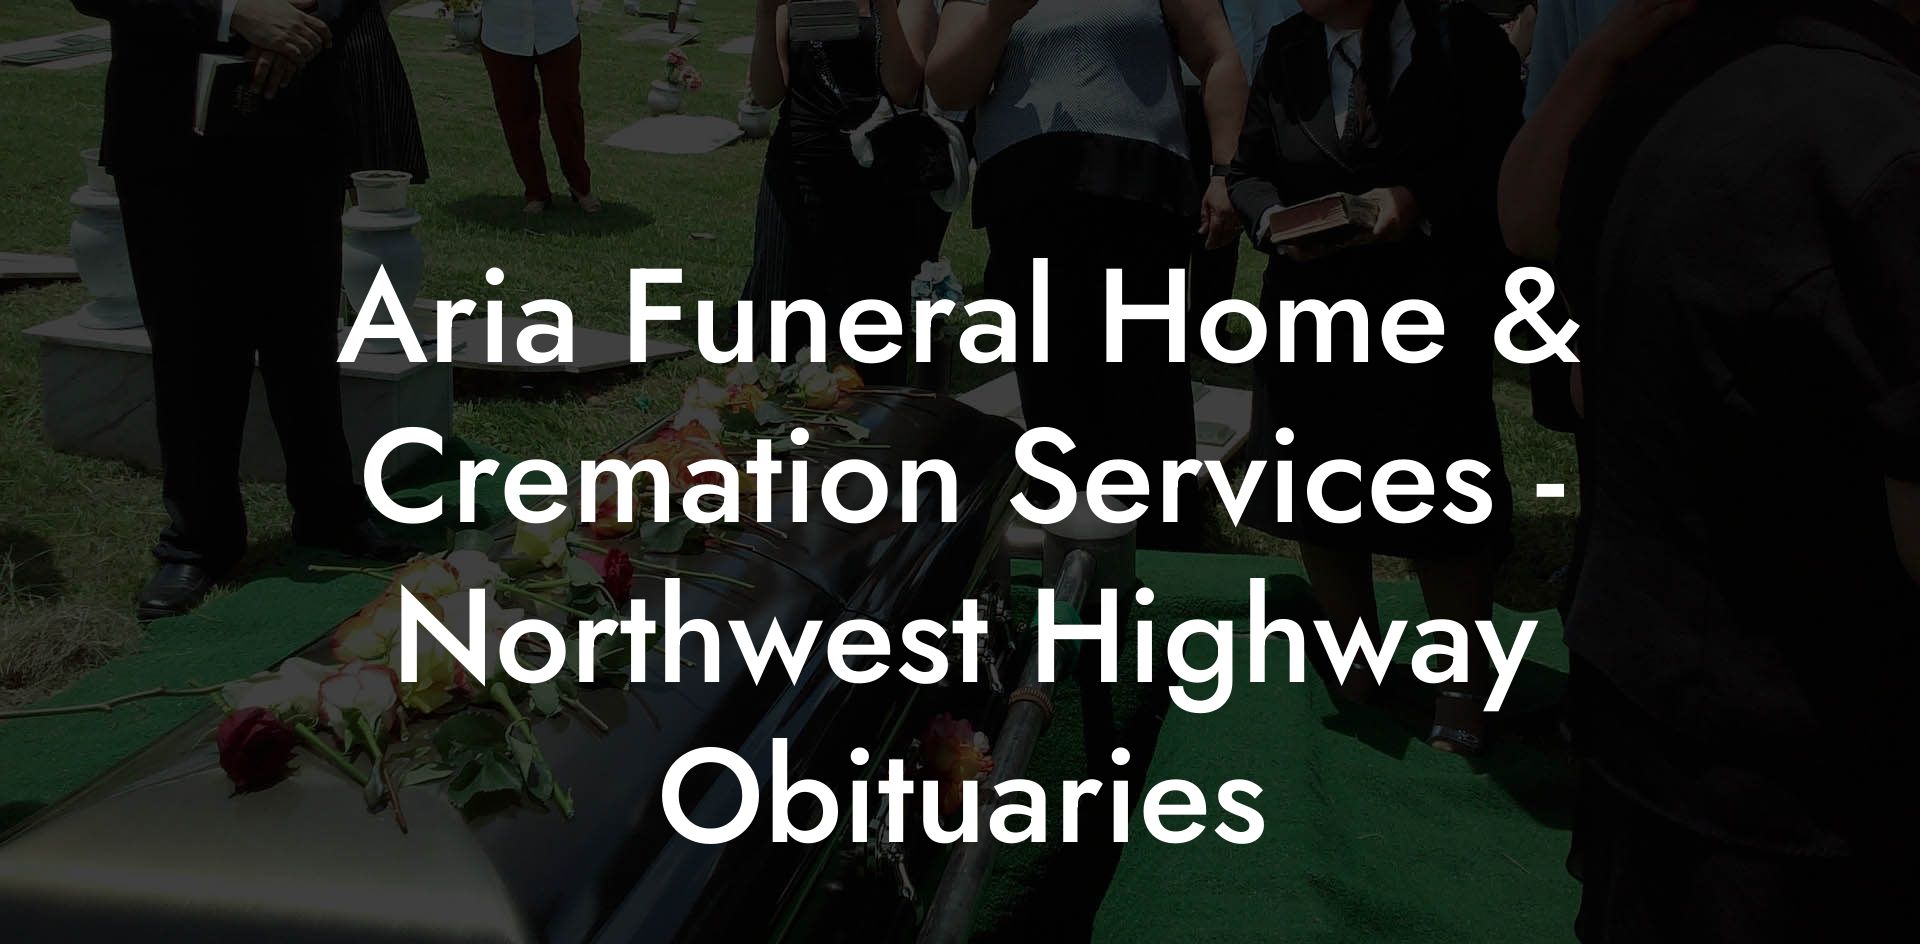 Aria Funeral Home & Cremation Services - Northwest Highway Obituaries